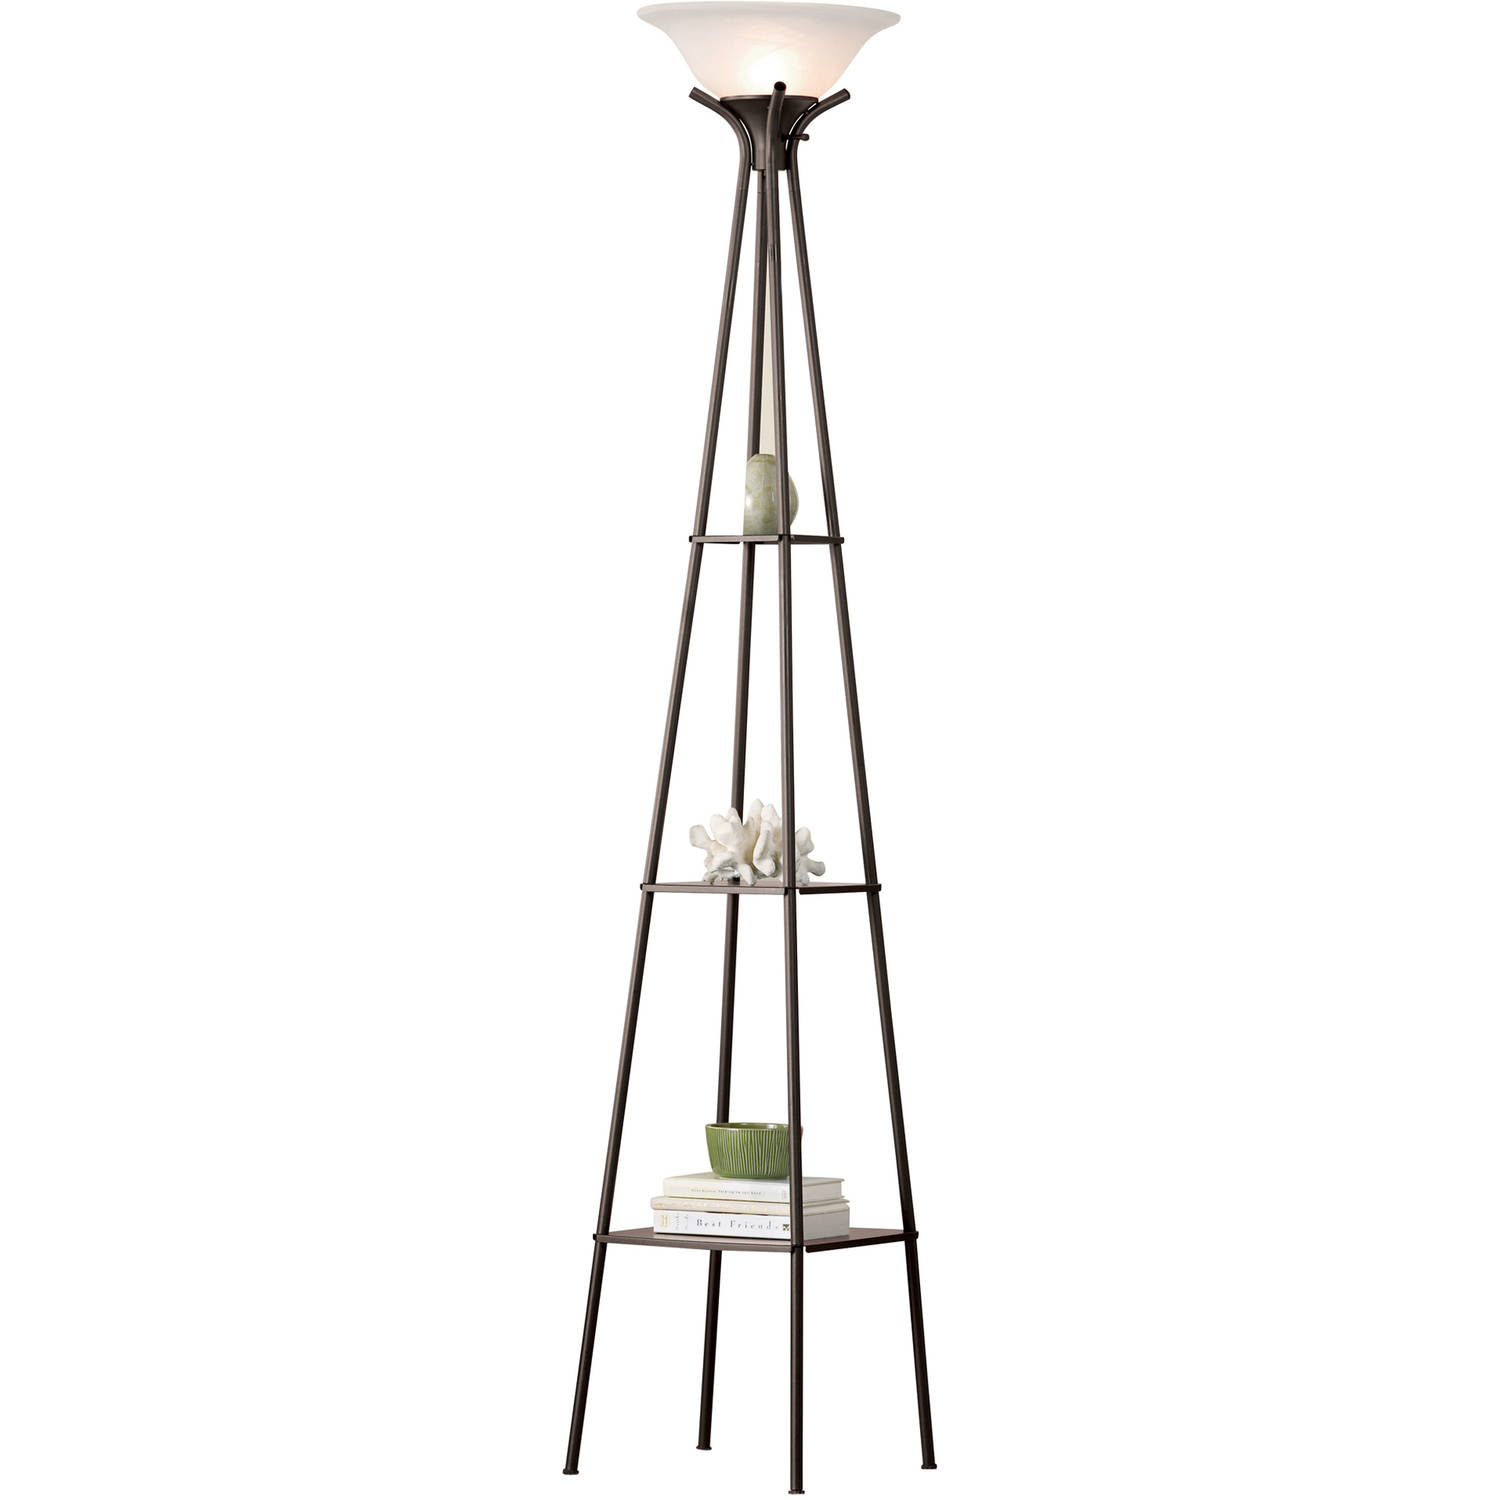 Mainstays 69 Etagere Floor Lamp Charcoal Finish Led Bulb Included Walmart in size 1500 X 1500